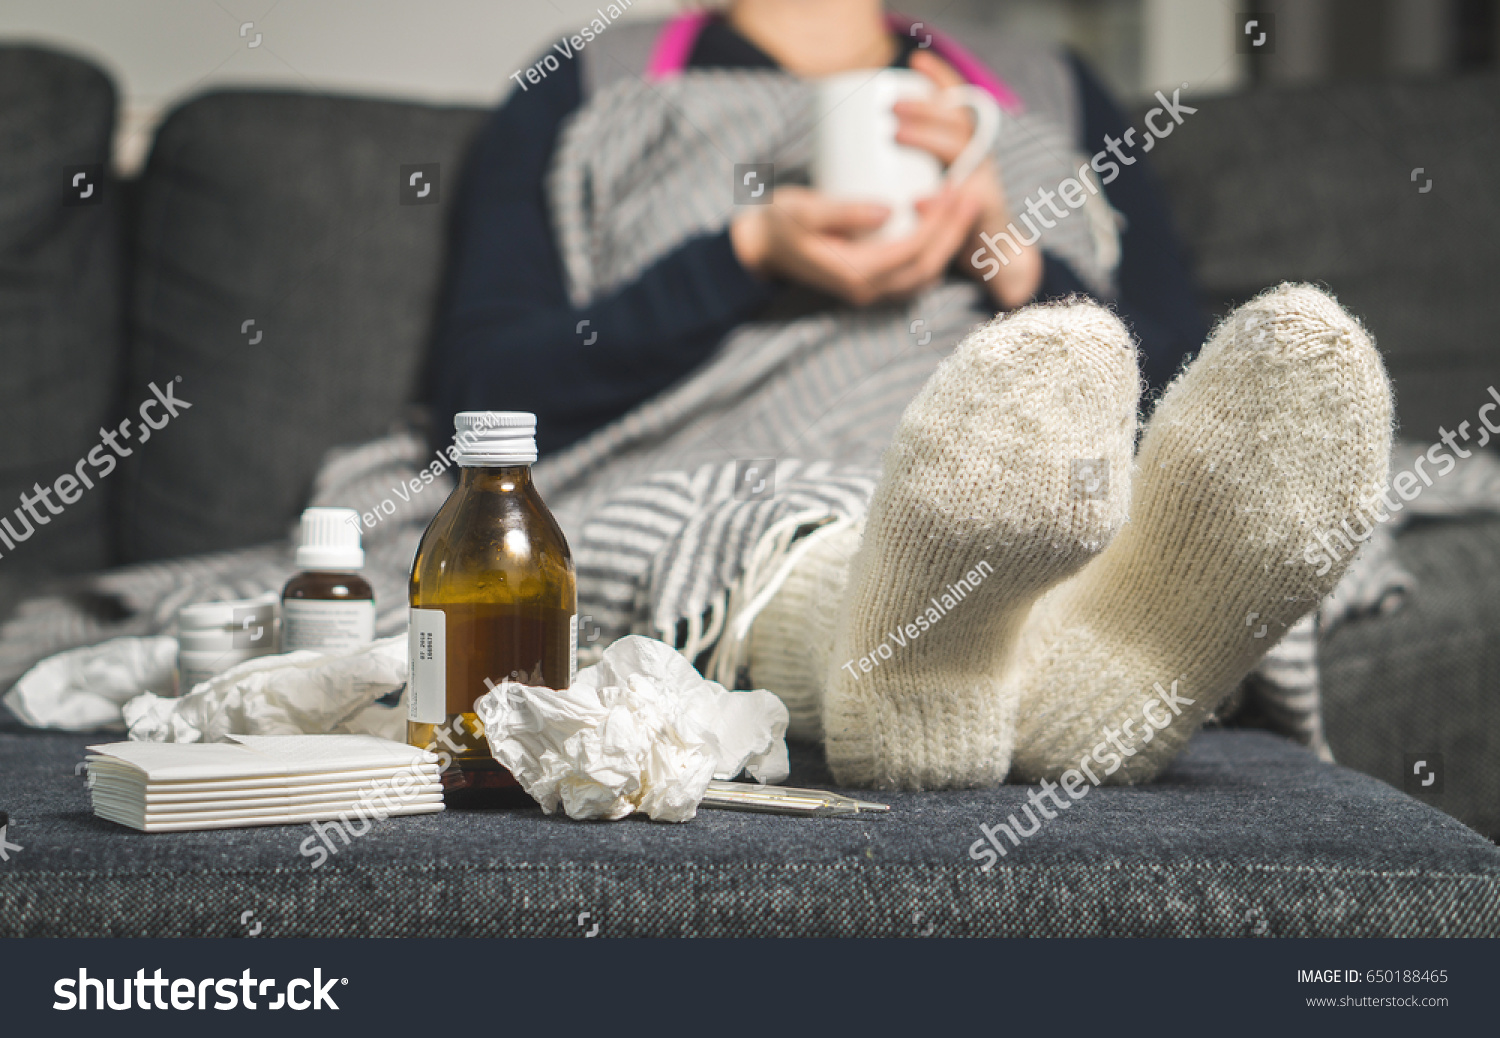 Cold medicine and sick woman drinking hot beverage to get well from flu, fever and virus. Dirty paper towels and tissues on table. Ill person wearing warm woolen stocking socks in winter.  #650188465